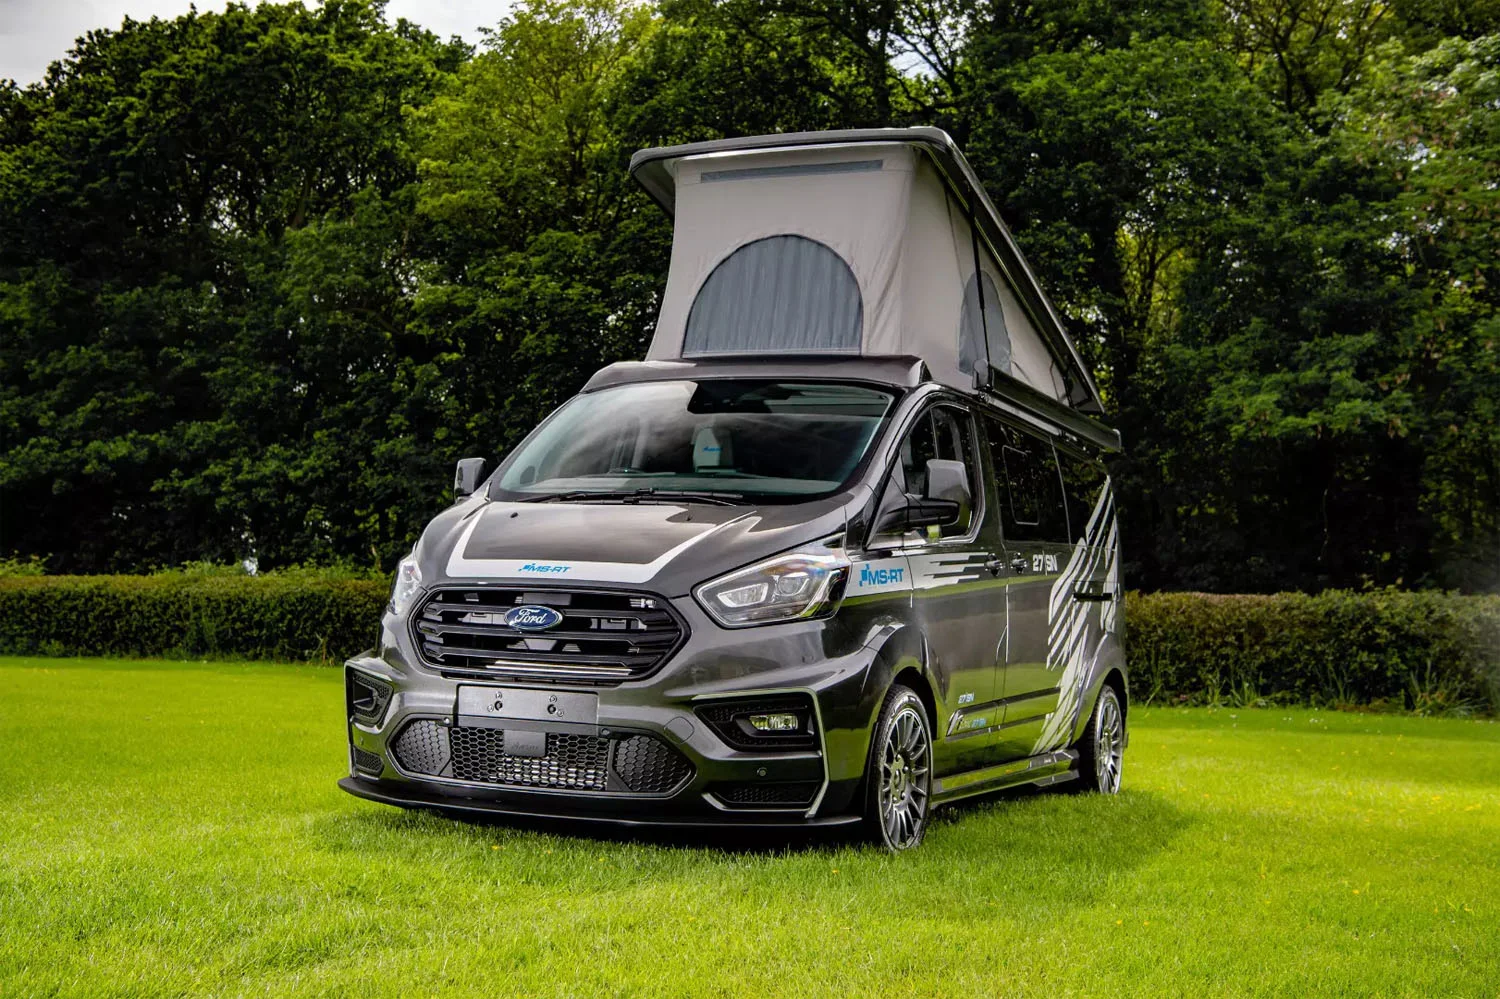 Ford Transit Custom Camper Van Has Style Inside And Out